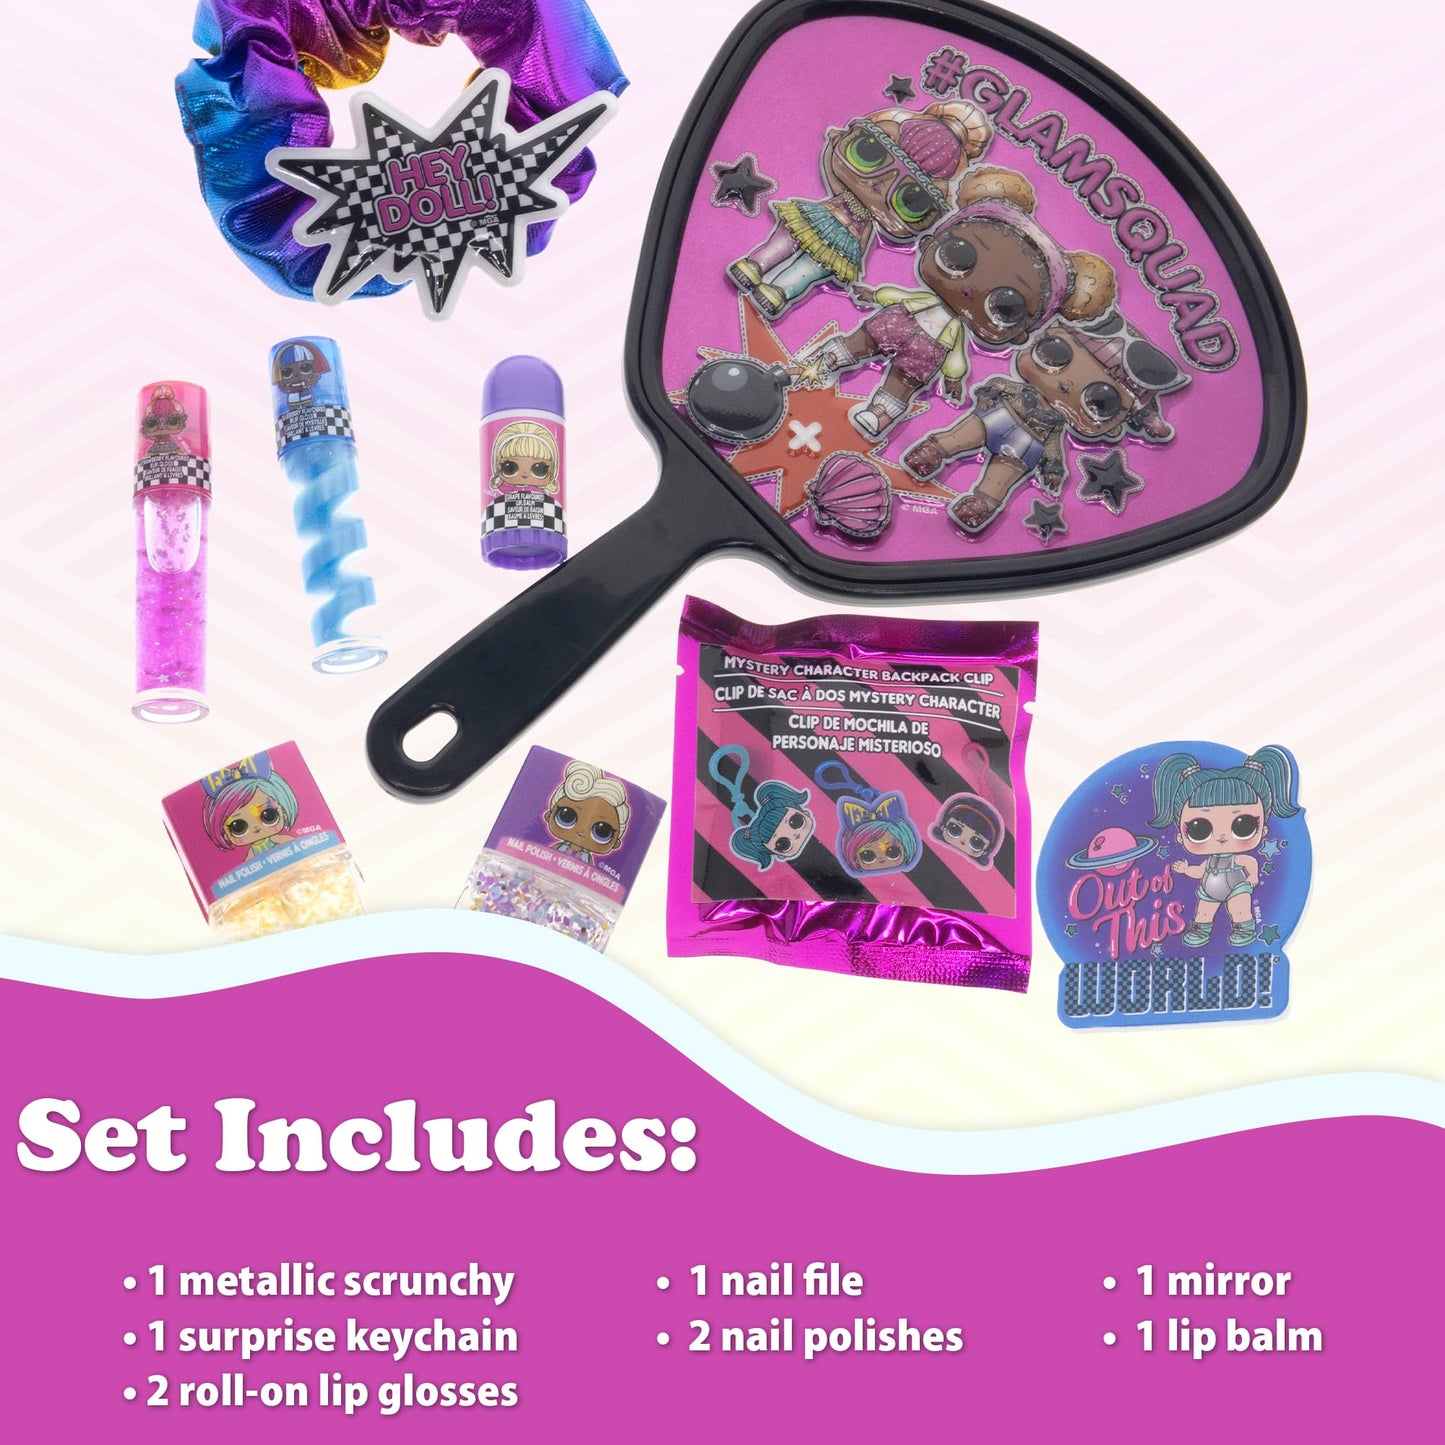 L.O.L Surprise! Townley Girl backpack Cosmetic makeup Set 10 Pieces, Including Lip Gloss, Nail Polish, Scrunchy, Mirror and Surprise Keychain, Ages 5+ Perfect for Parties, Sleepovers and Makeovers